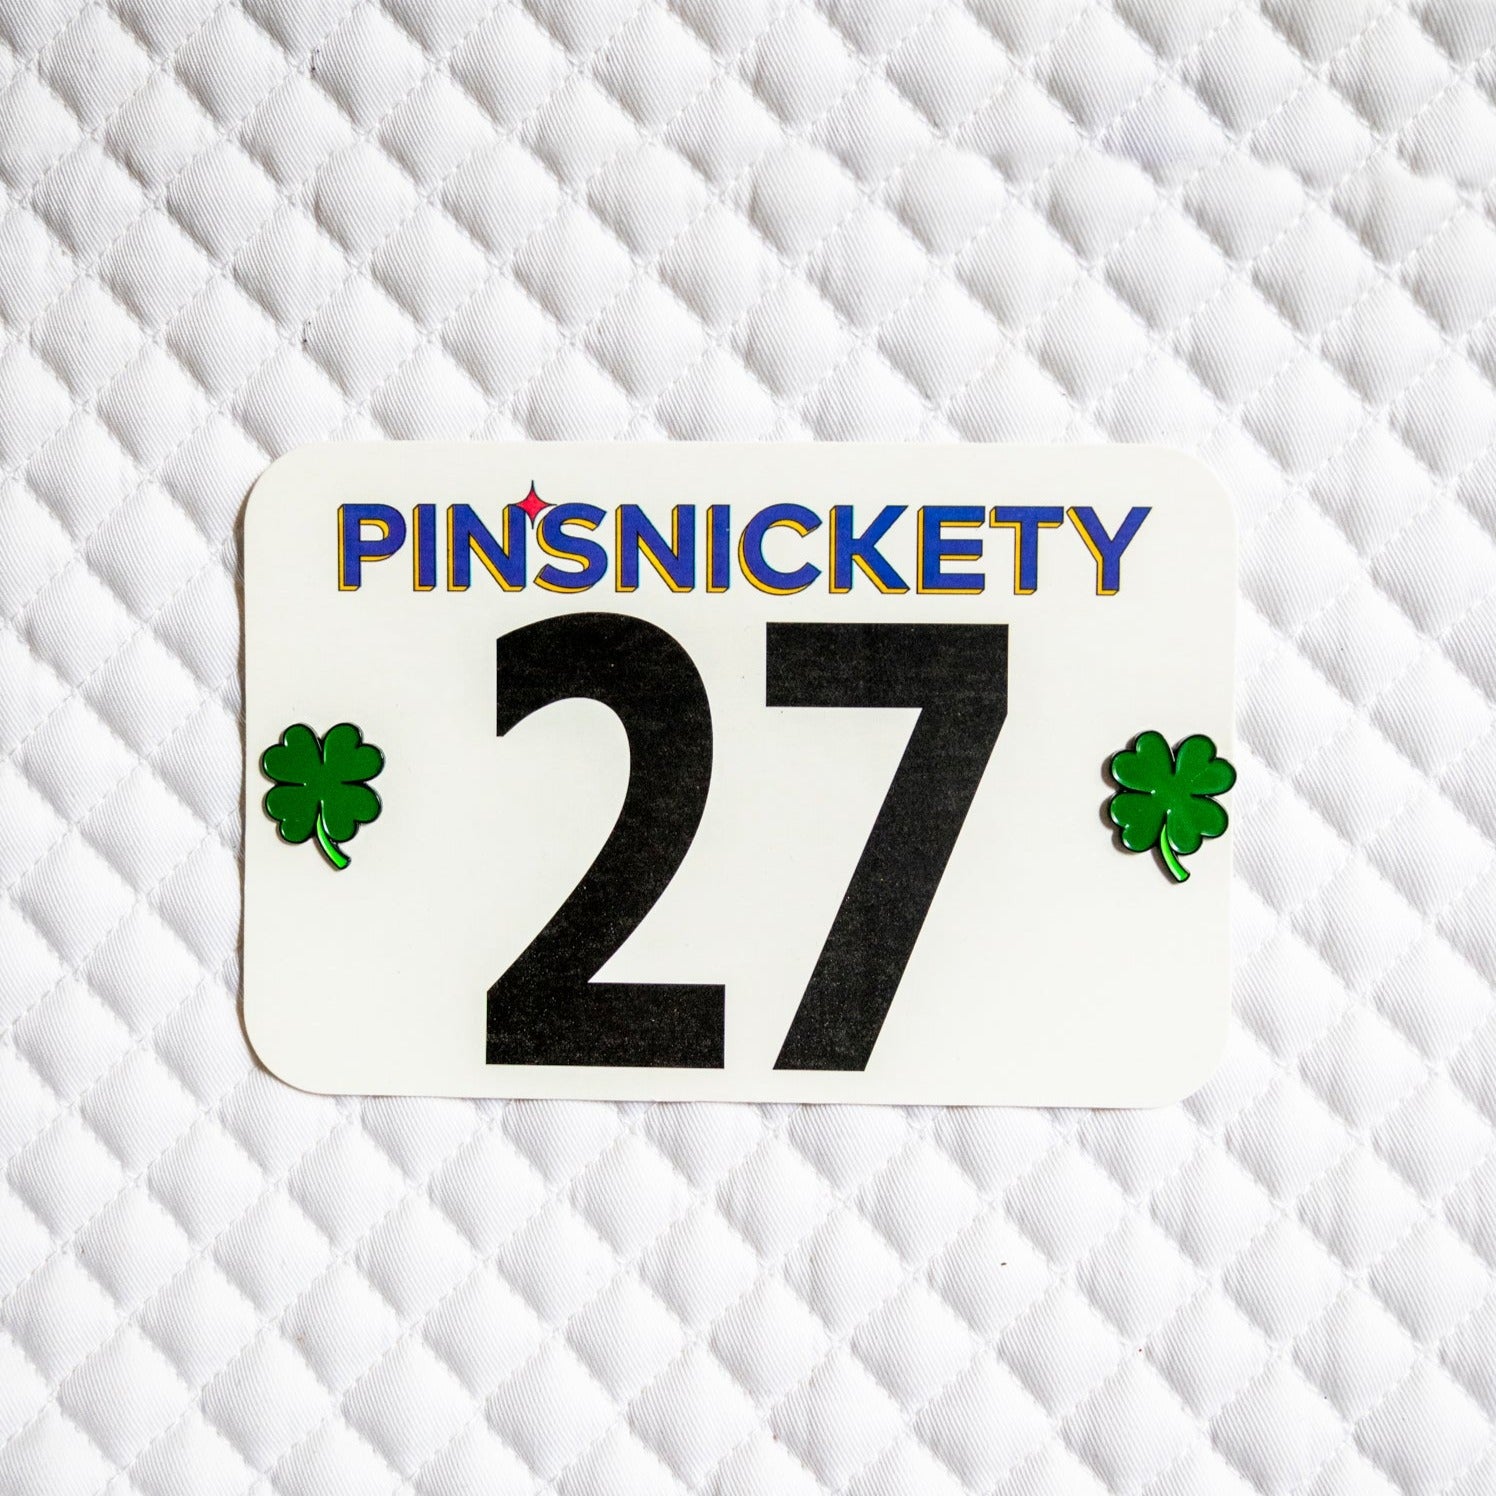 Pinsnickety Clover horse show number pins on a saddle pad